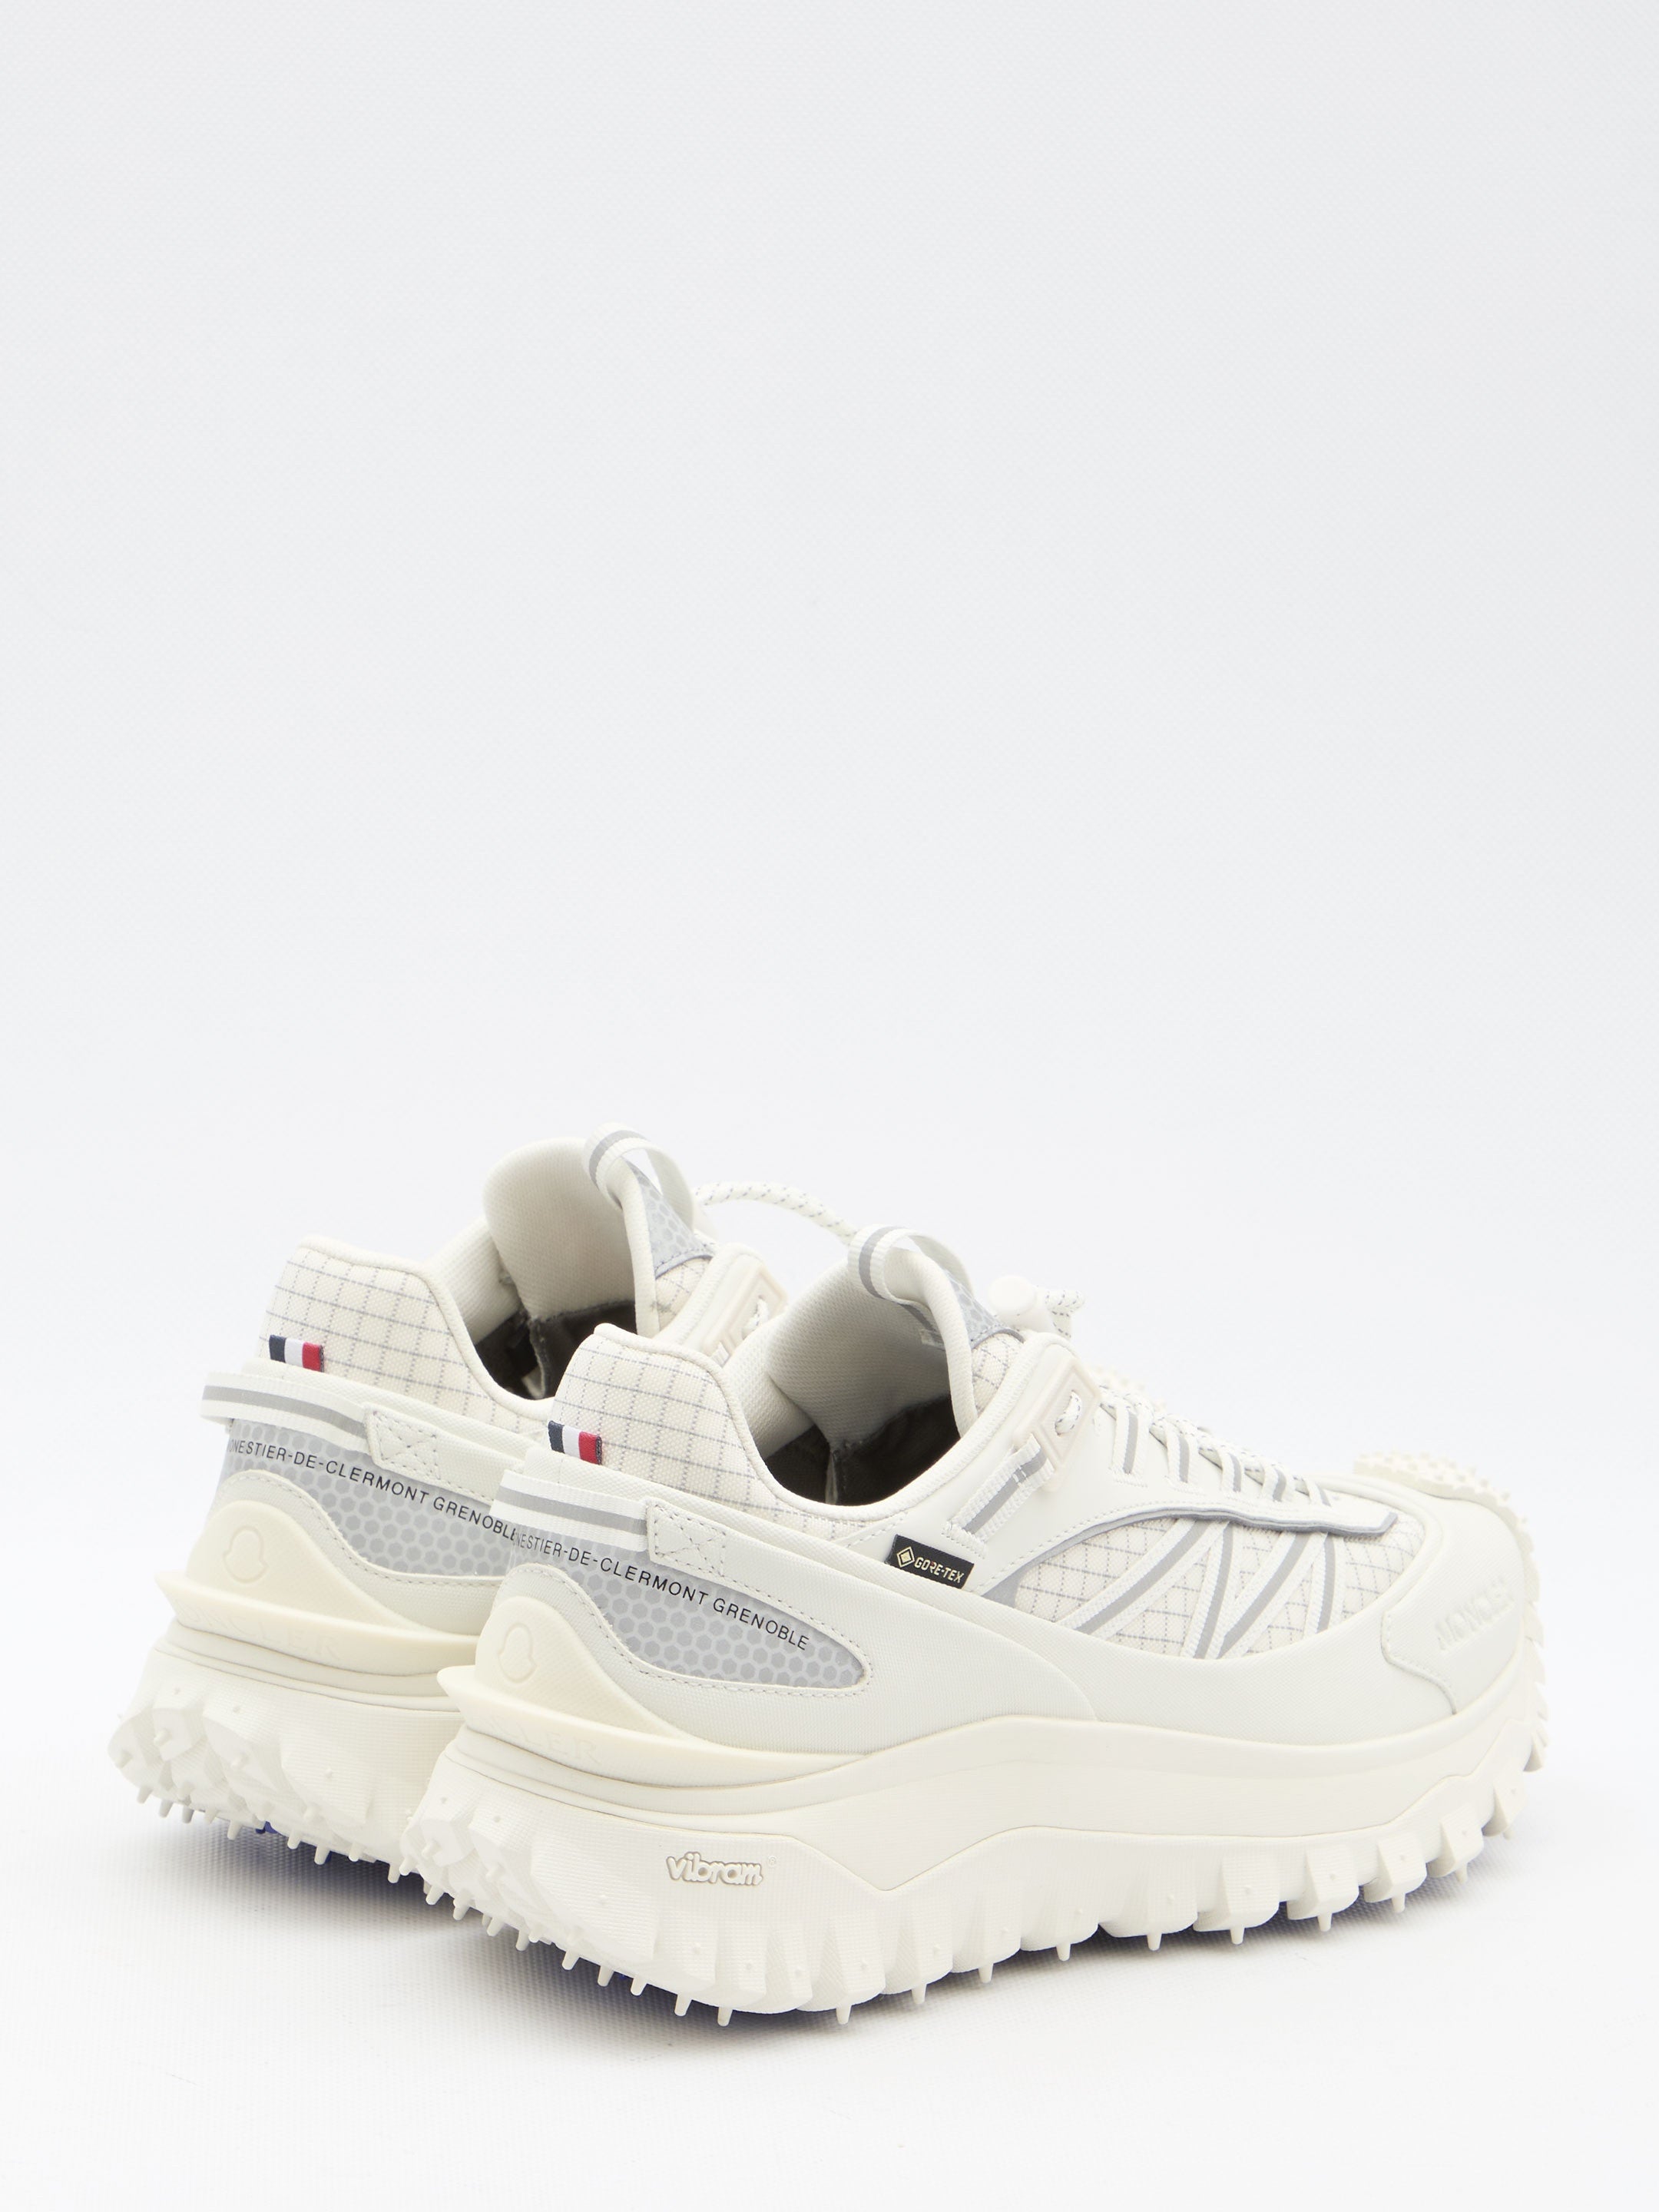 MONCLER-OUTLET-SALE-Trailgrip-GTX-sneakers-Sneakers-44-WHITE-ARCHIVE-COLLECTION-3.jpg